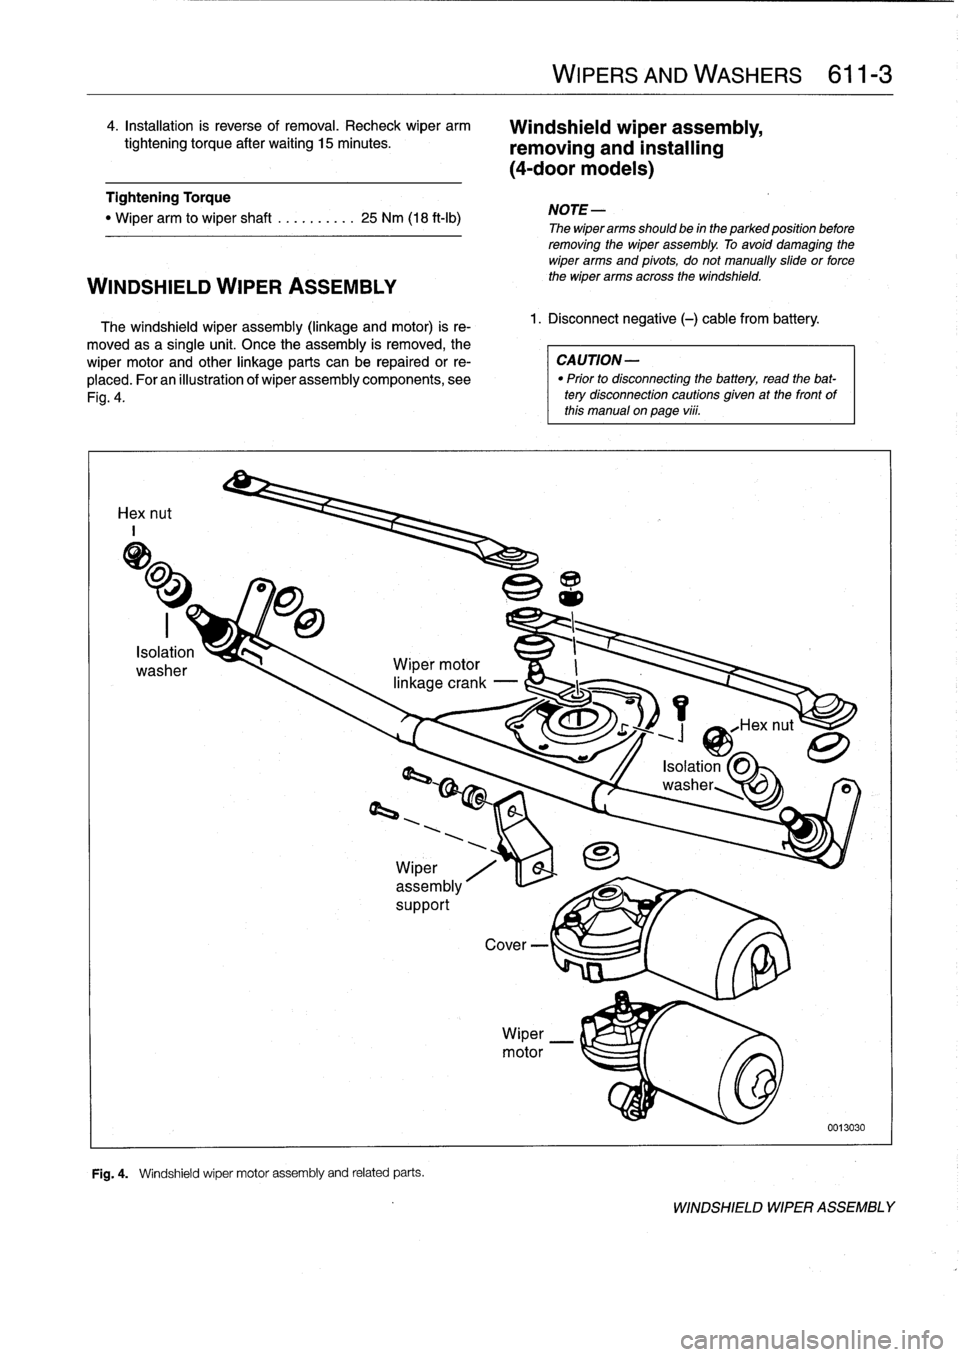 BMW 318i 1997 E36 Workshop Manual 
4
.
Installation
is
reverse
of
removal
.
Recheck
wiper
arm

tightening
torque
after
waiting
15minutes
.

Tightening
Torque

"
Wiper
arm
to
wiper
shaft
..........
25
Nm
(18
ft-Ib)

WINDSHIELD
WIPER
AS